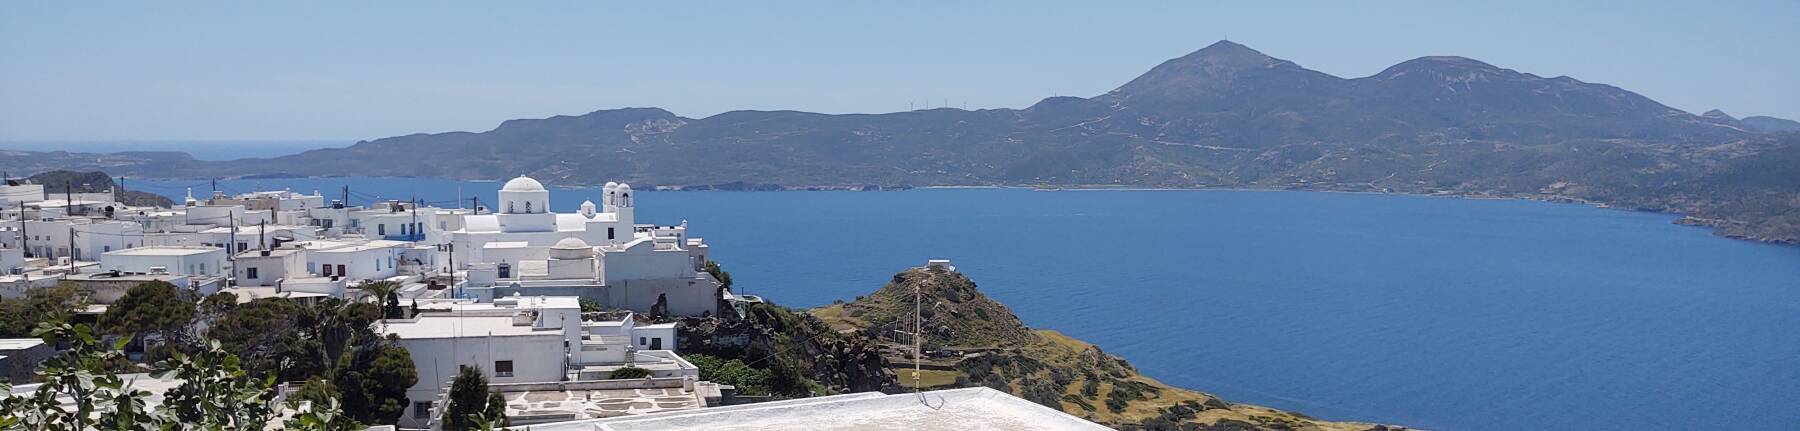 View from Plaka over the volcanic caldera bay of Milos.